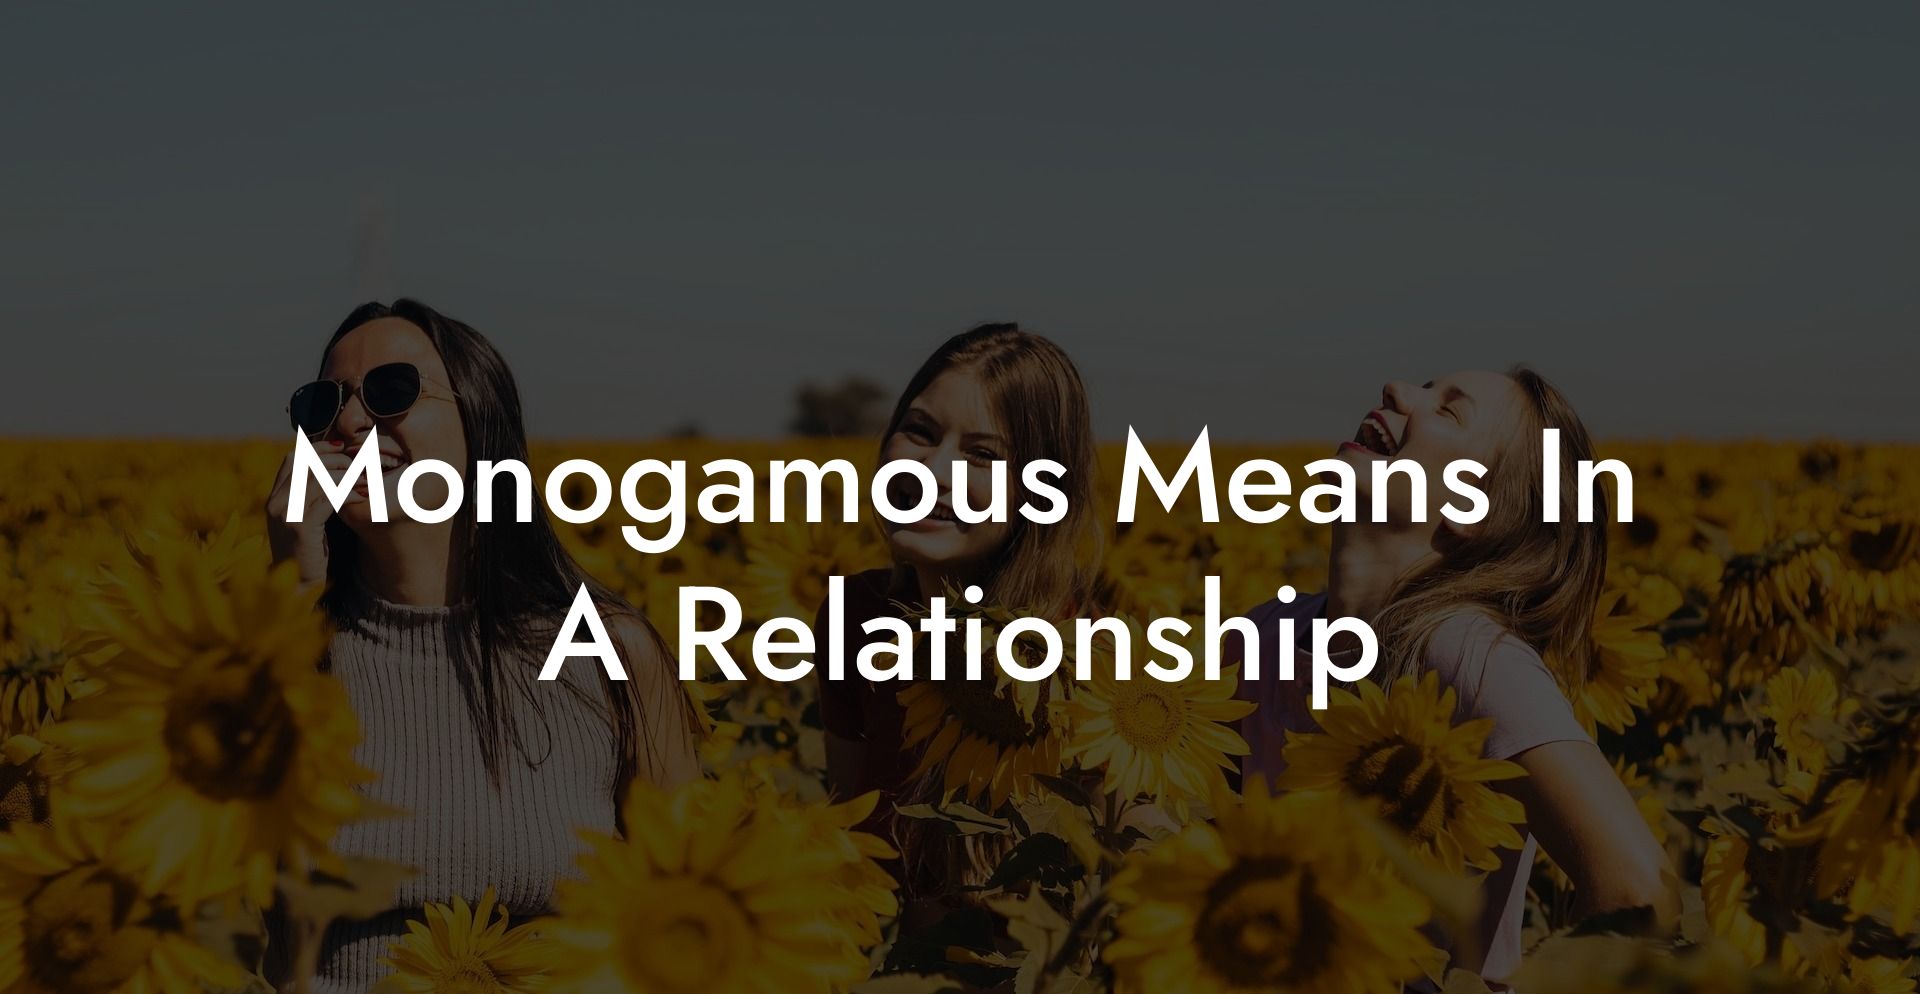 Monogamous Means In A Relationship